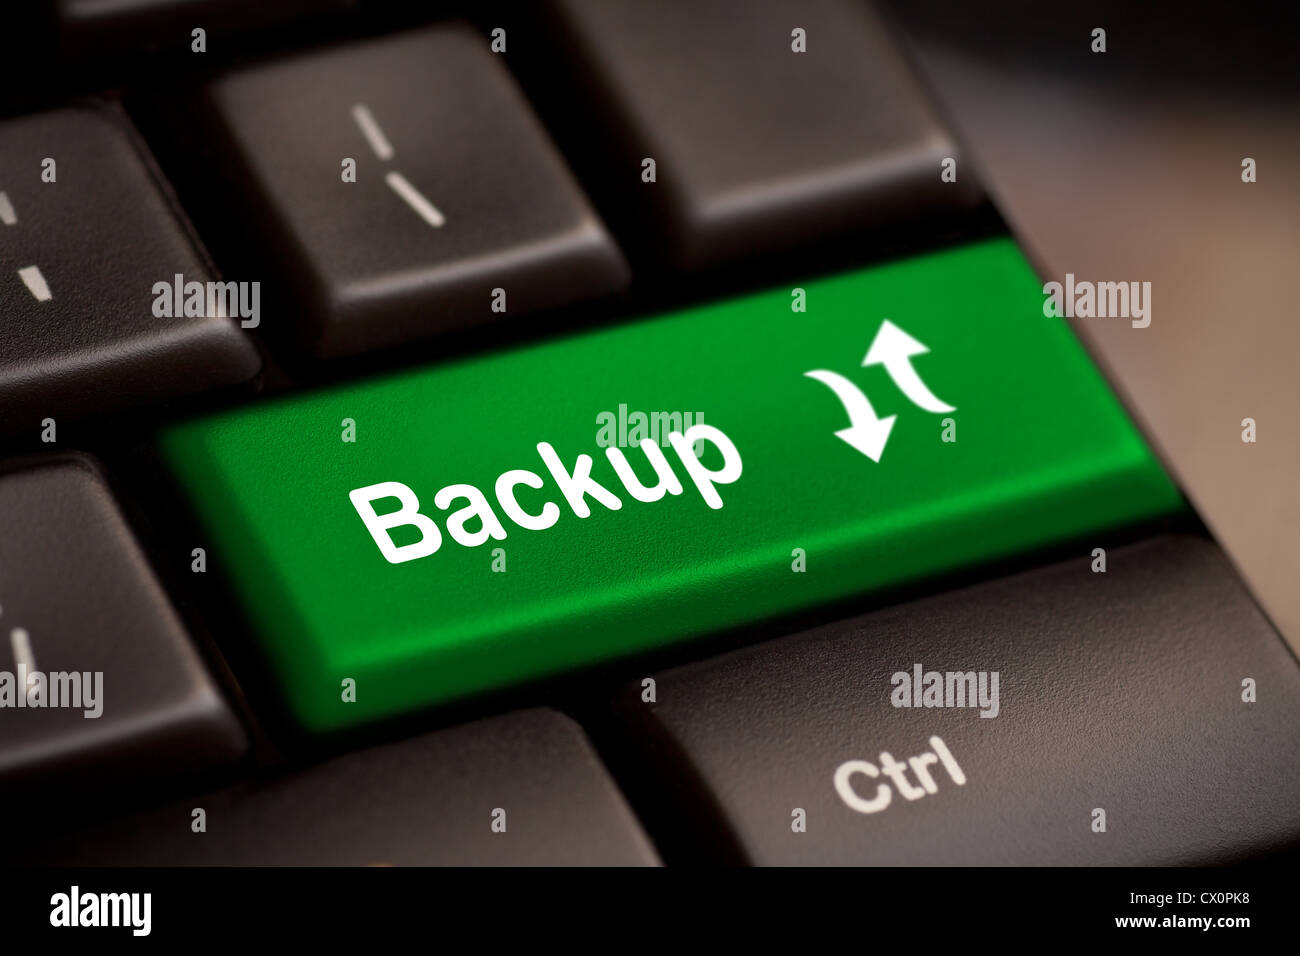 Backup Computer Key In Green For Archiving And Storage Stock Photo